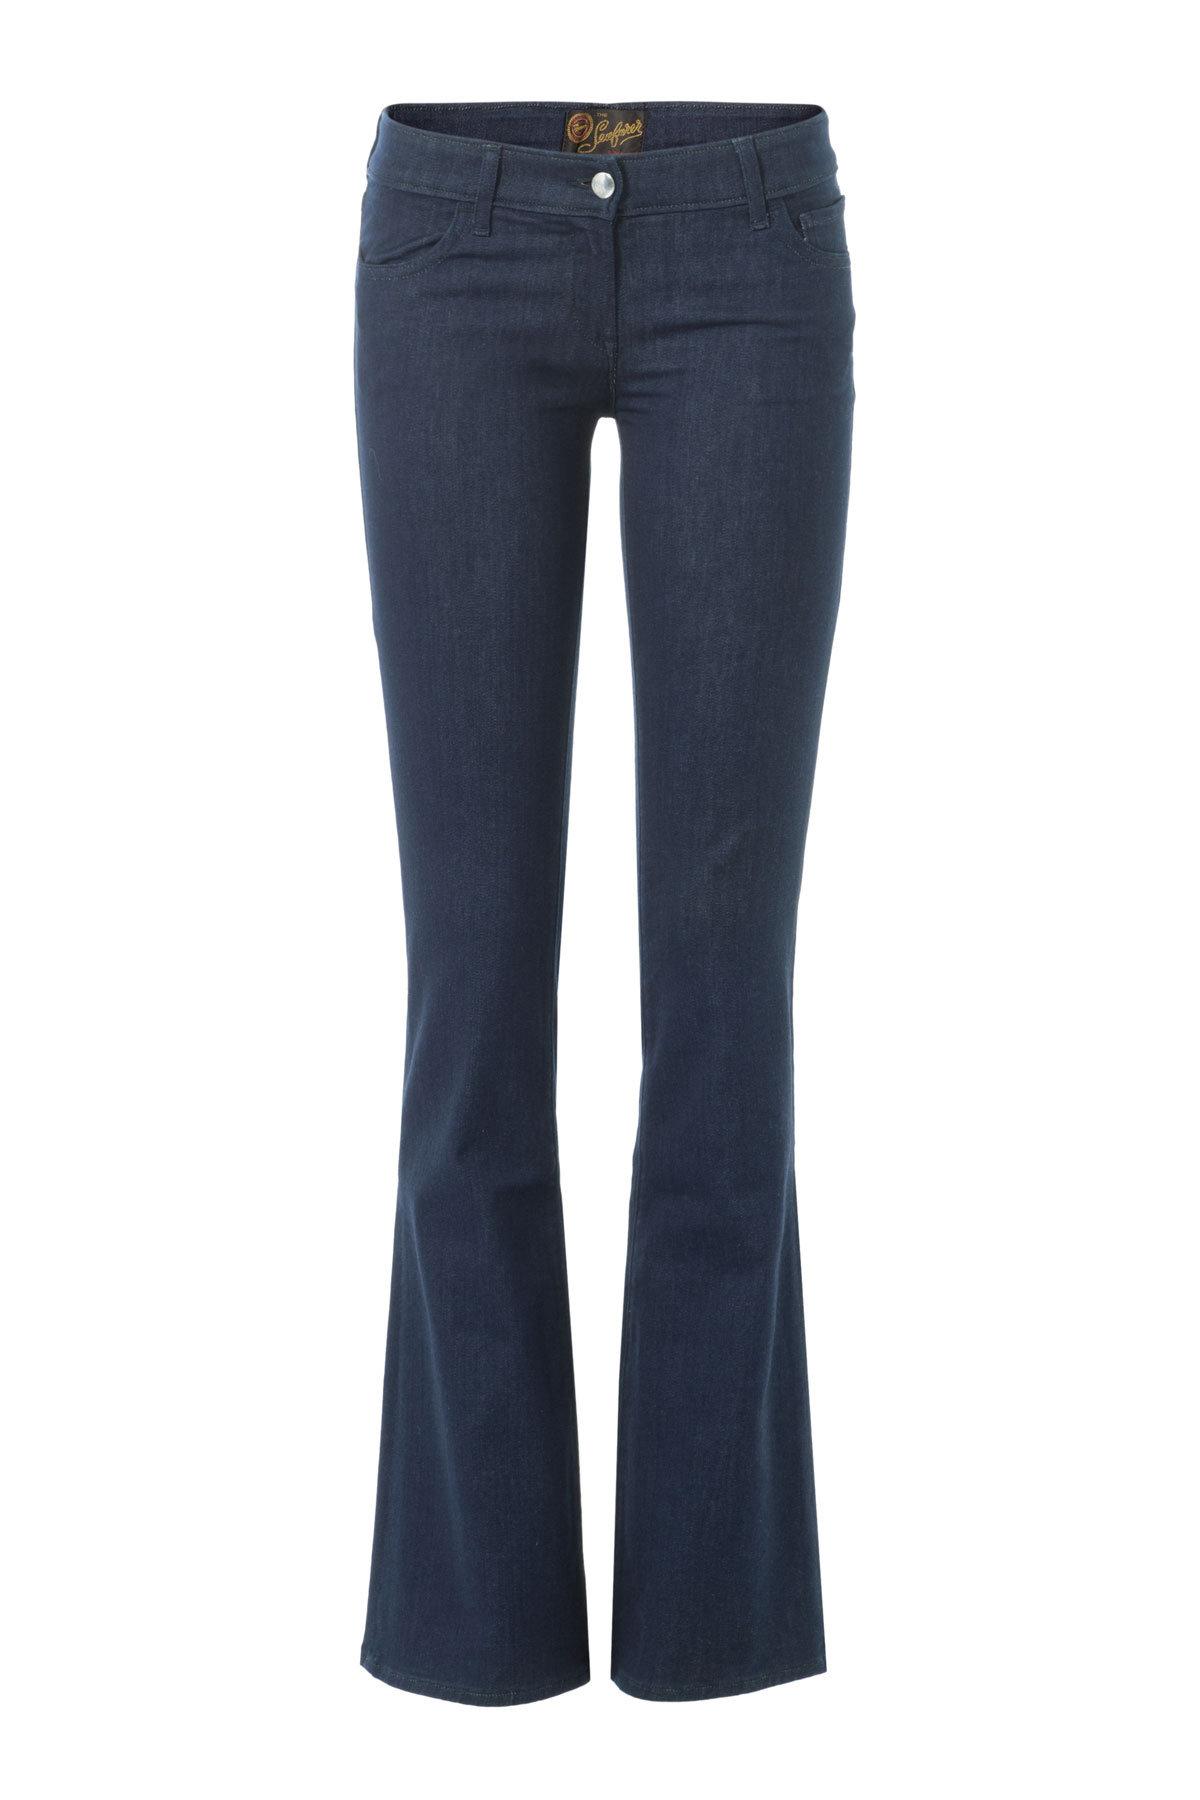 Lyst - The Seafarer Flared Skinny Jeans in Blue